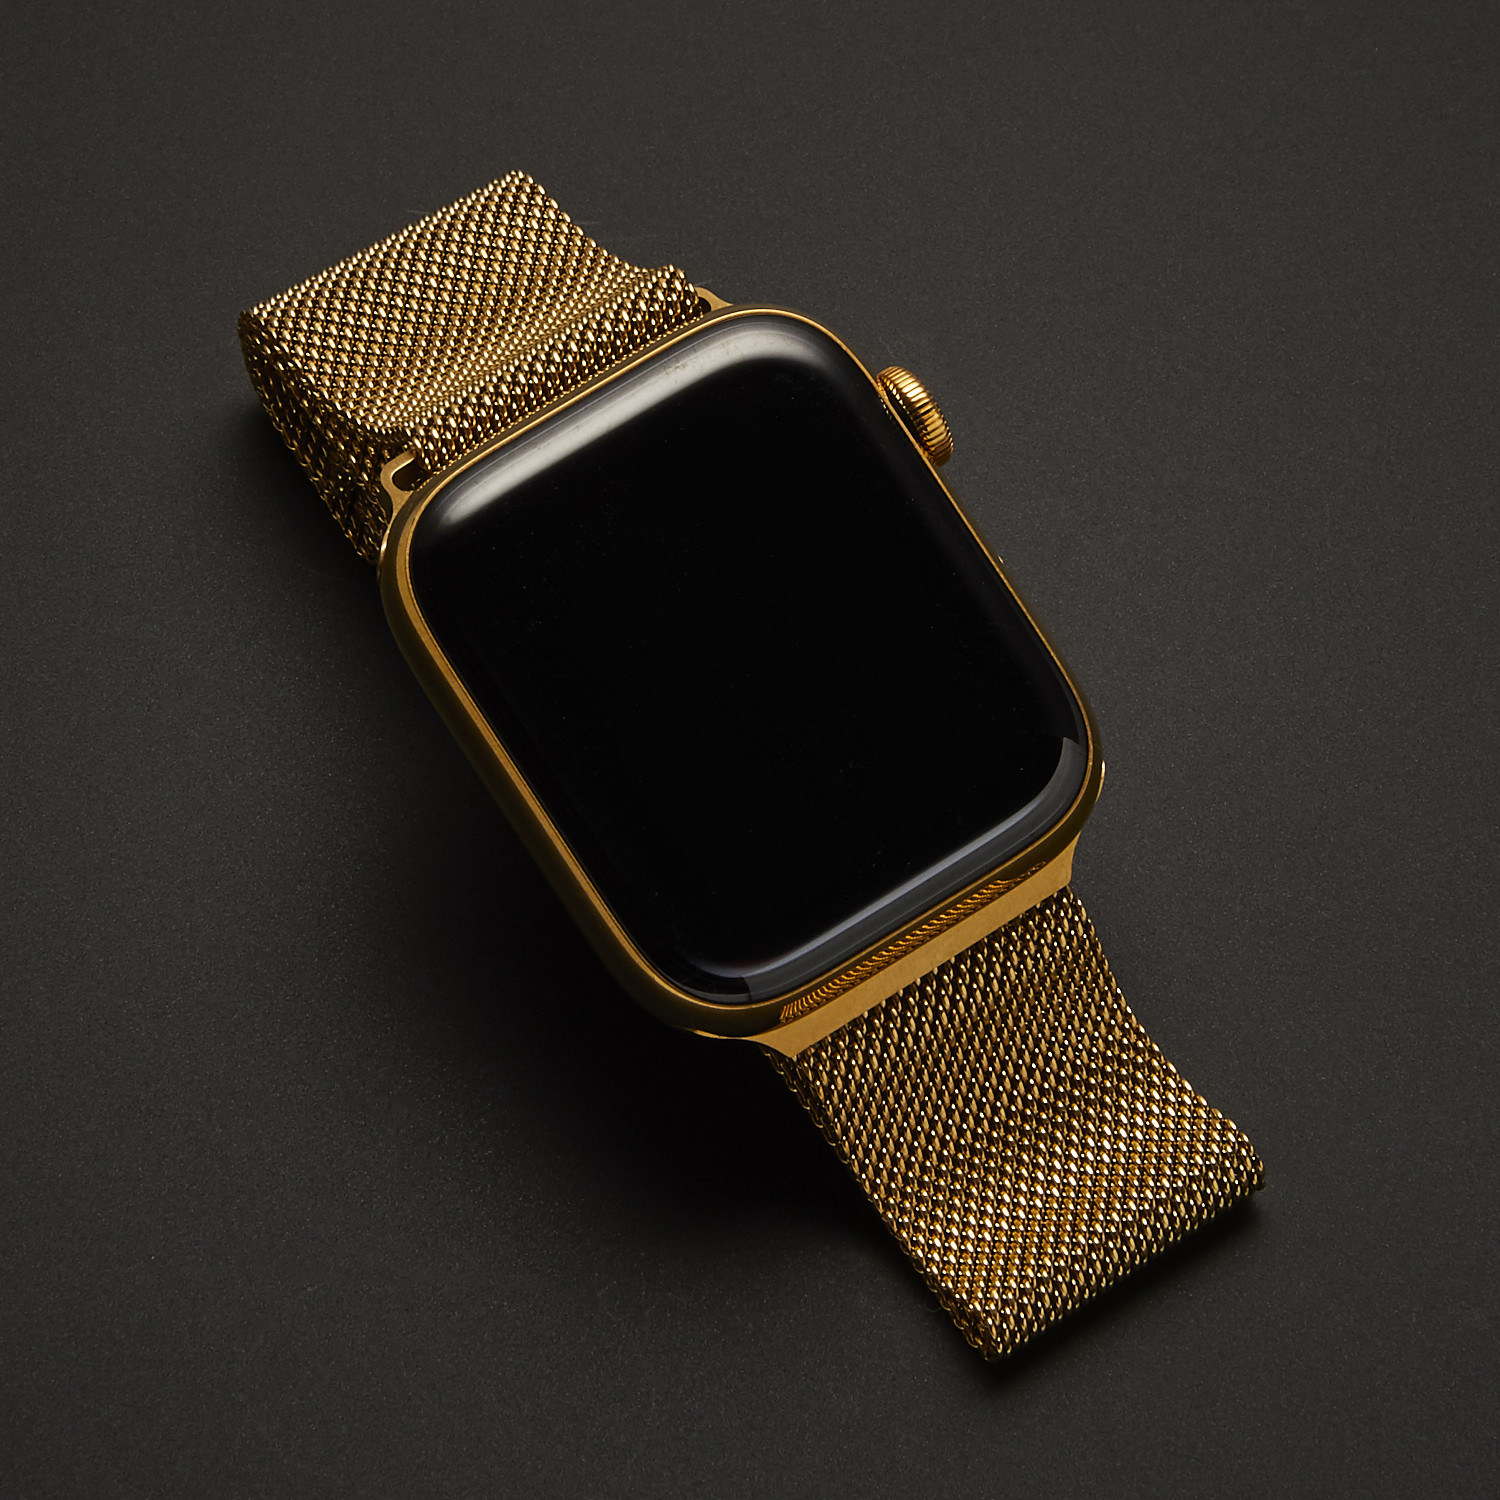 24K Gold Apple Watch Series 5 // With Gold Milanese Loop Band (44 mm) - De Billas Luxury - Touch 